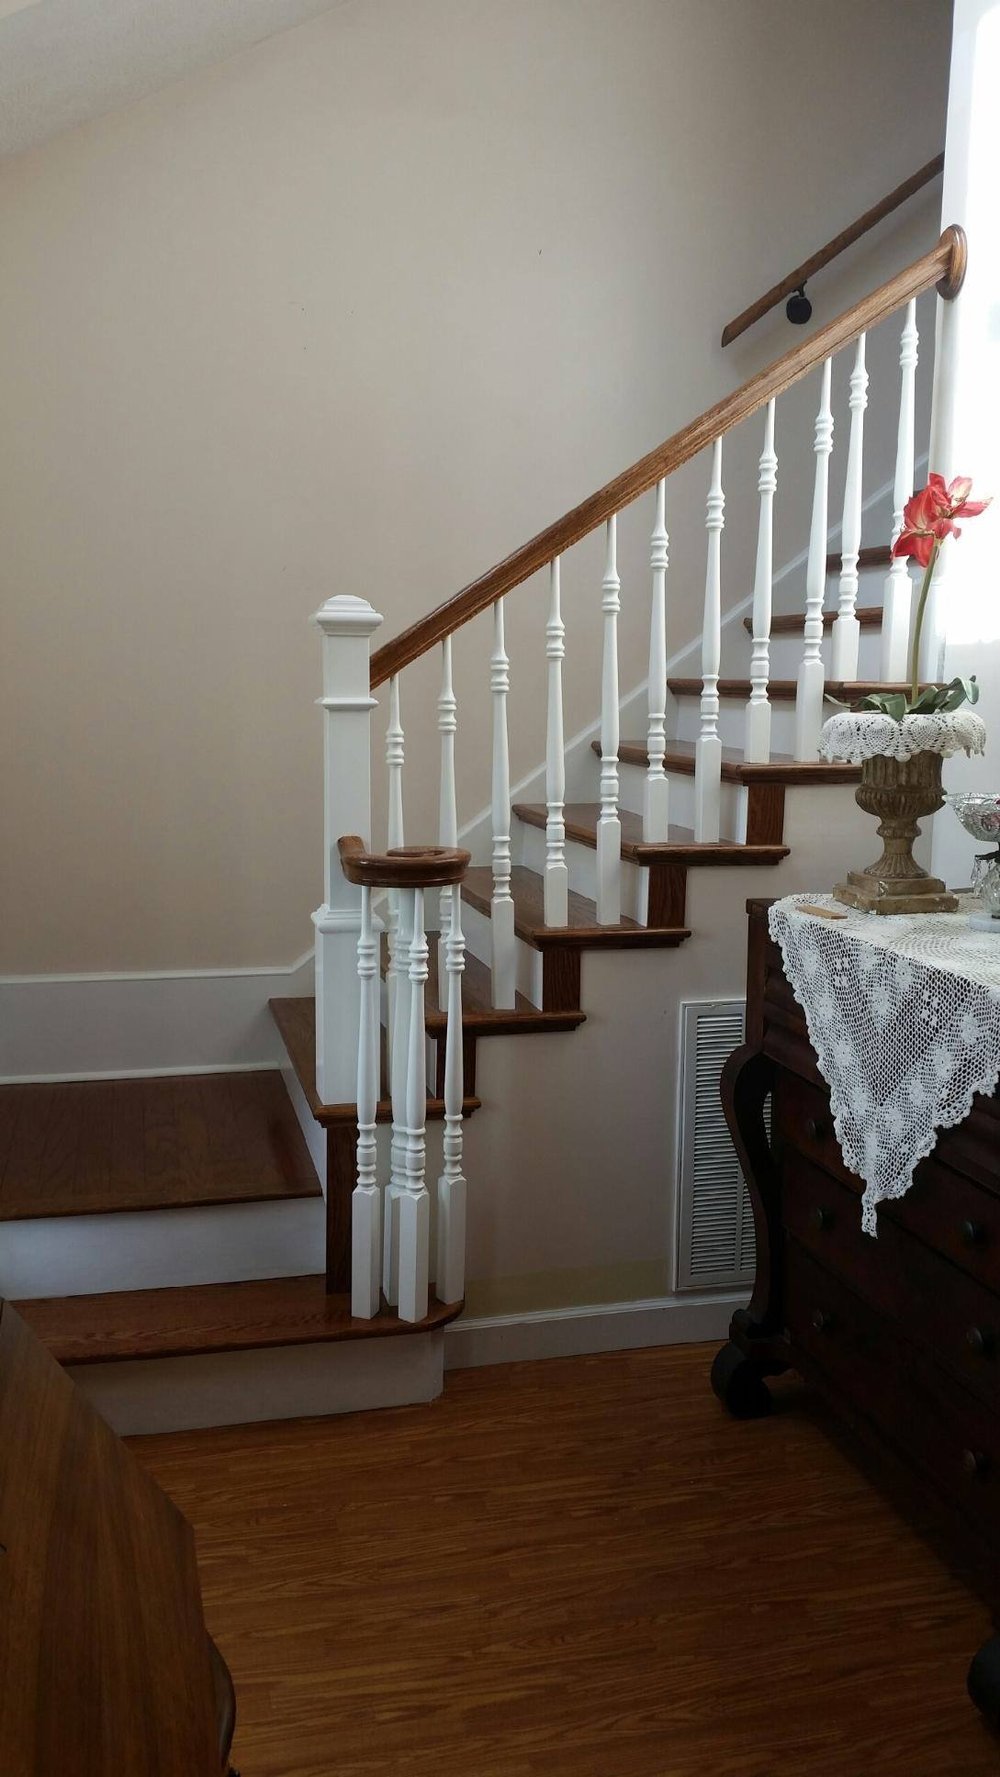 Stairs from Causey's Flooring Center in South Carolina